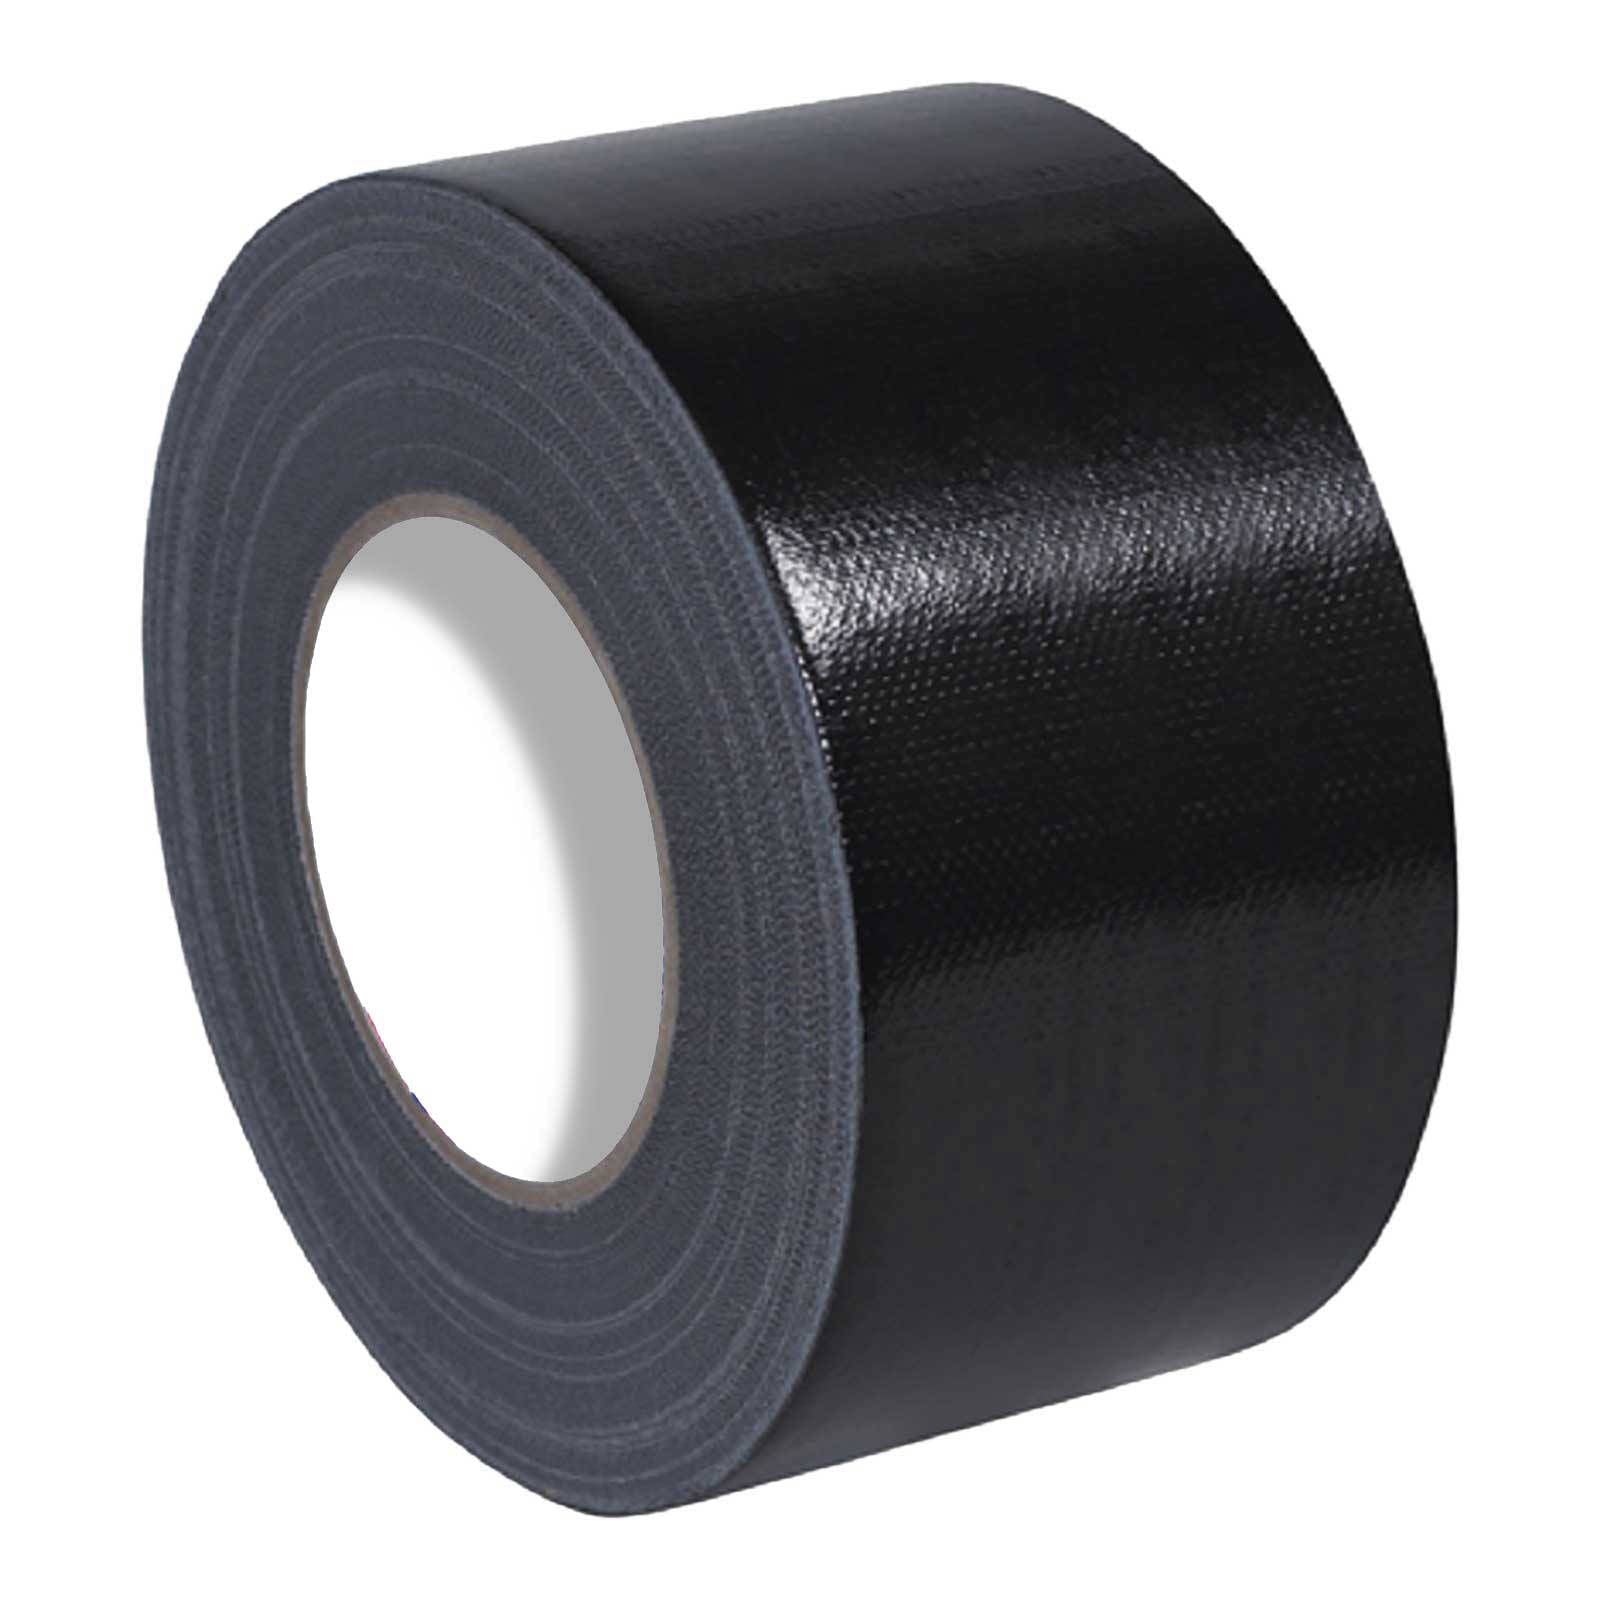 New WHITES Tape Duct Black 48mm (30m Roll) #TAPEDUCTB